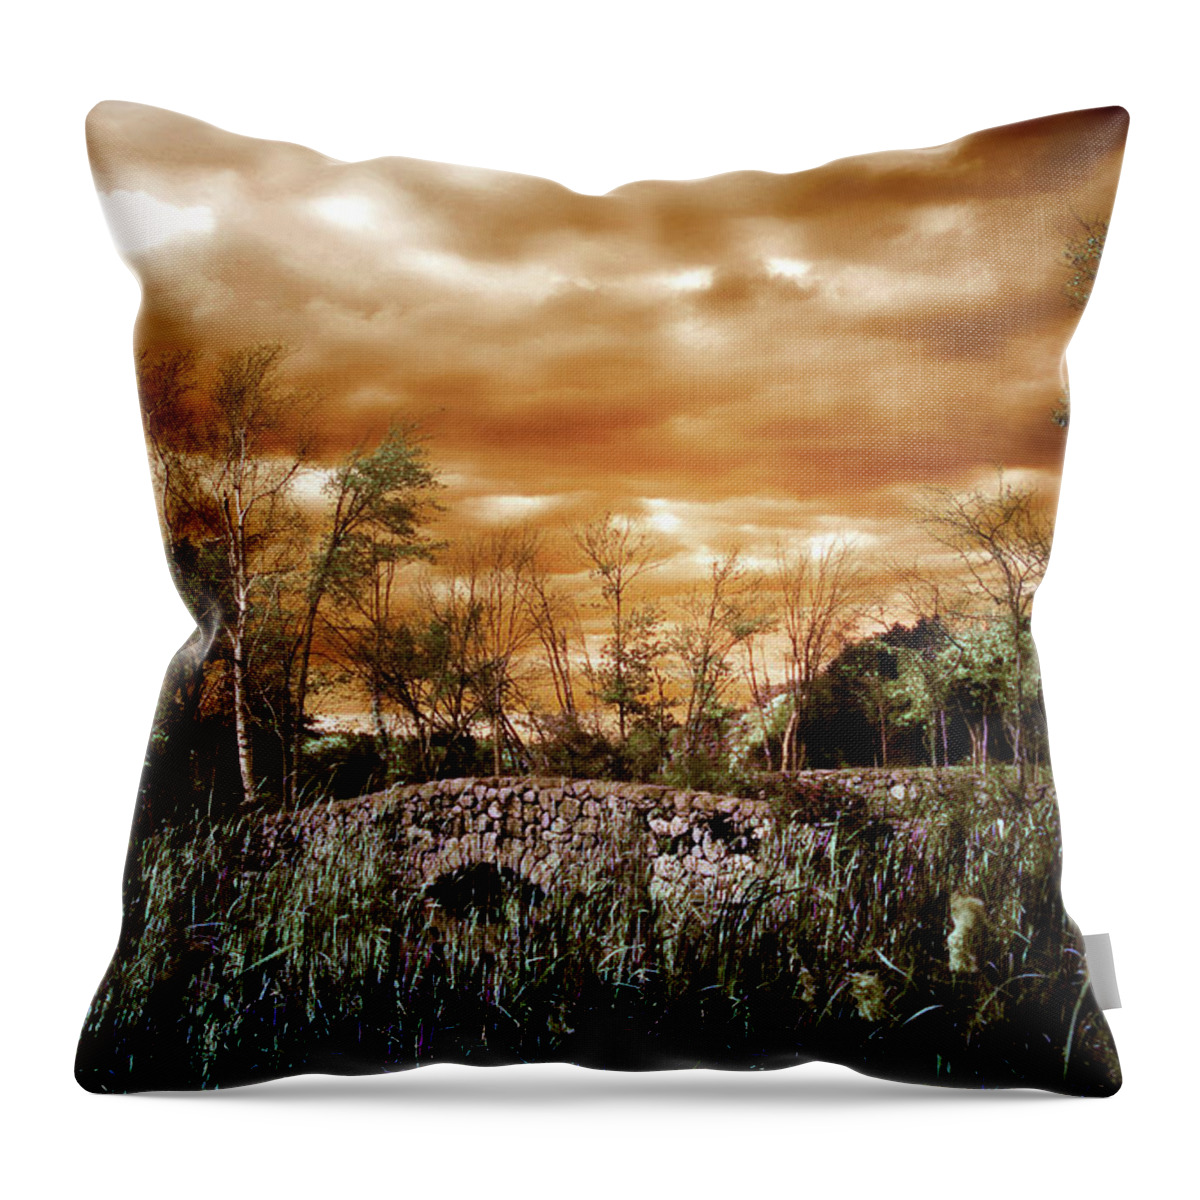 Moody Landscape Throw Pillow featuring the digital art Windy and Moody by Lilia D